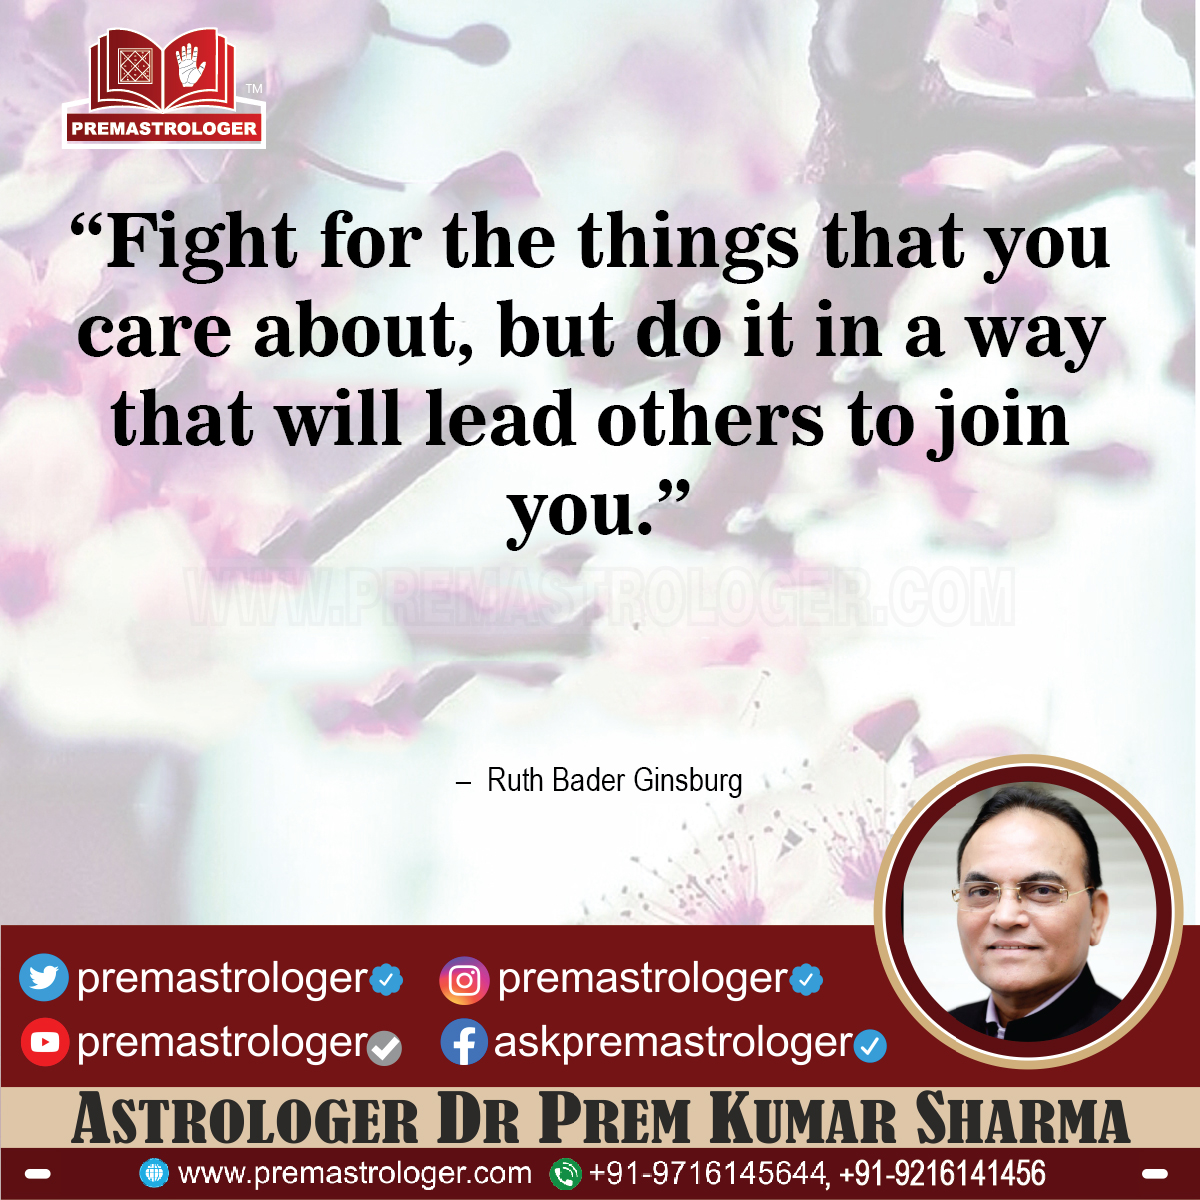 “Fight for the things that you care about, but do it in a way that will lead others to join you.” — Ruth Bader Ginsburg #MotivationalQuotes #motivational #positivityspread #PositiveVibes